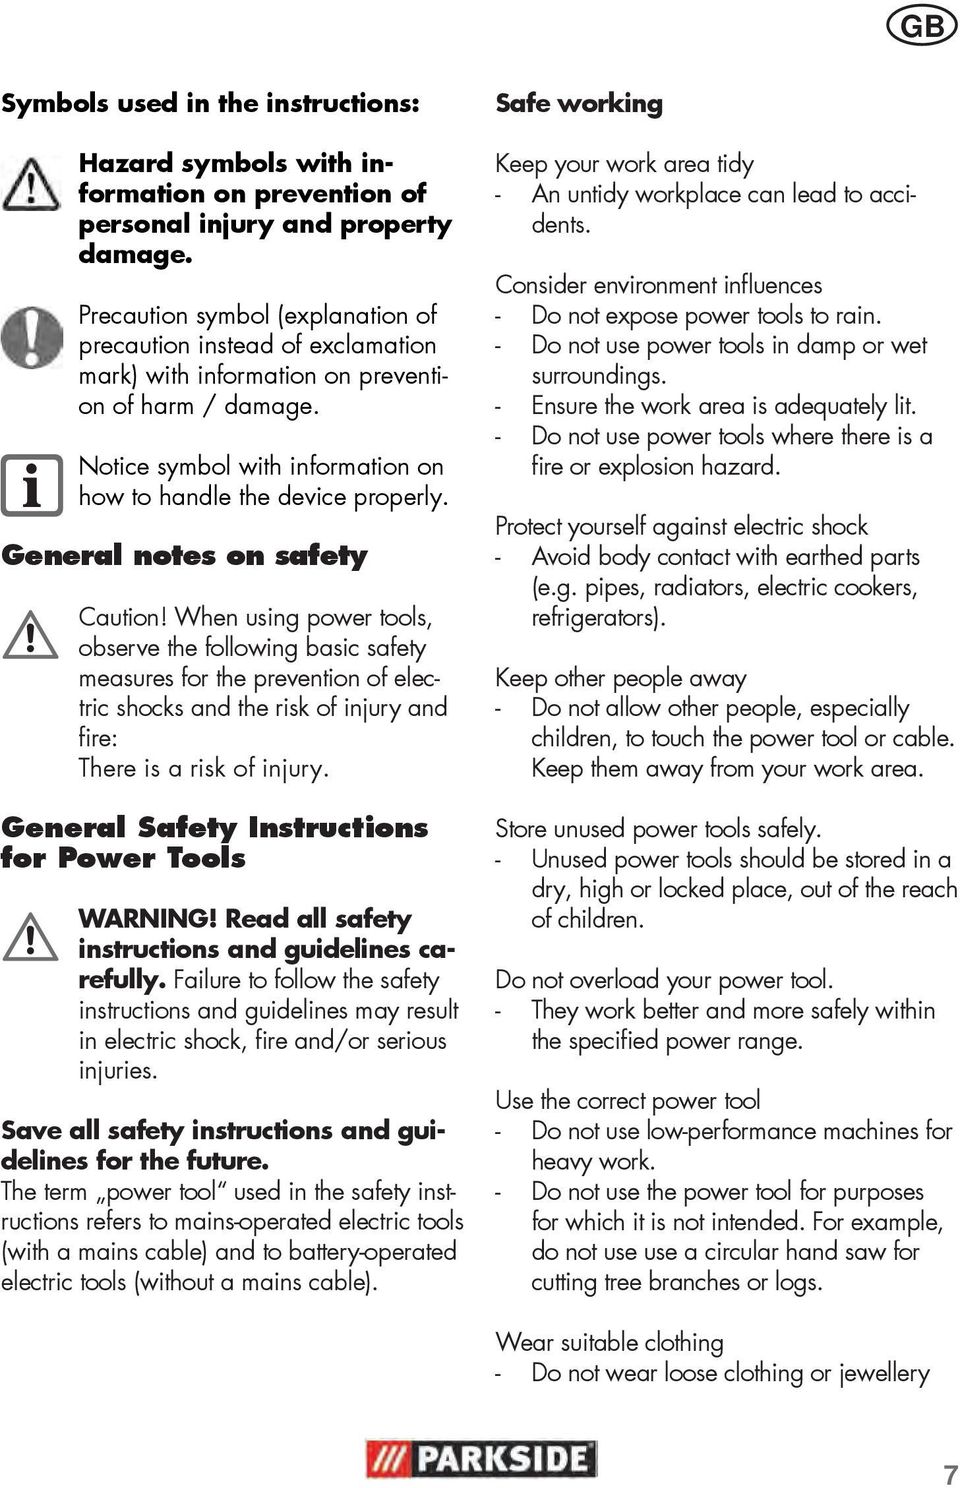 General notes on safety Caution! When using power tools, observe the following basic safety measures for the prevention of electric shocks and the risk of injury and fire: There is a risk of injury.